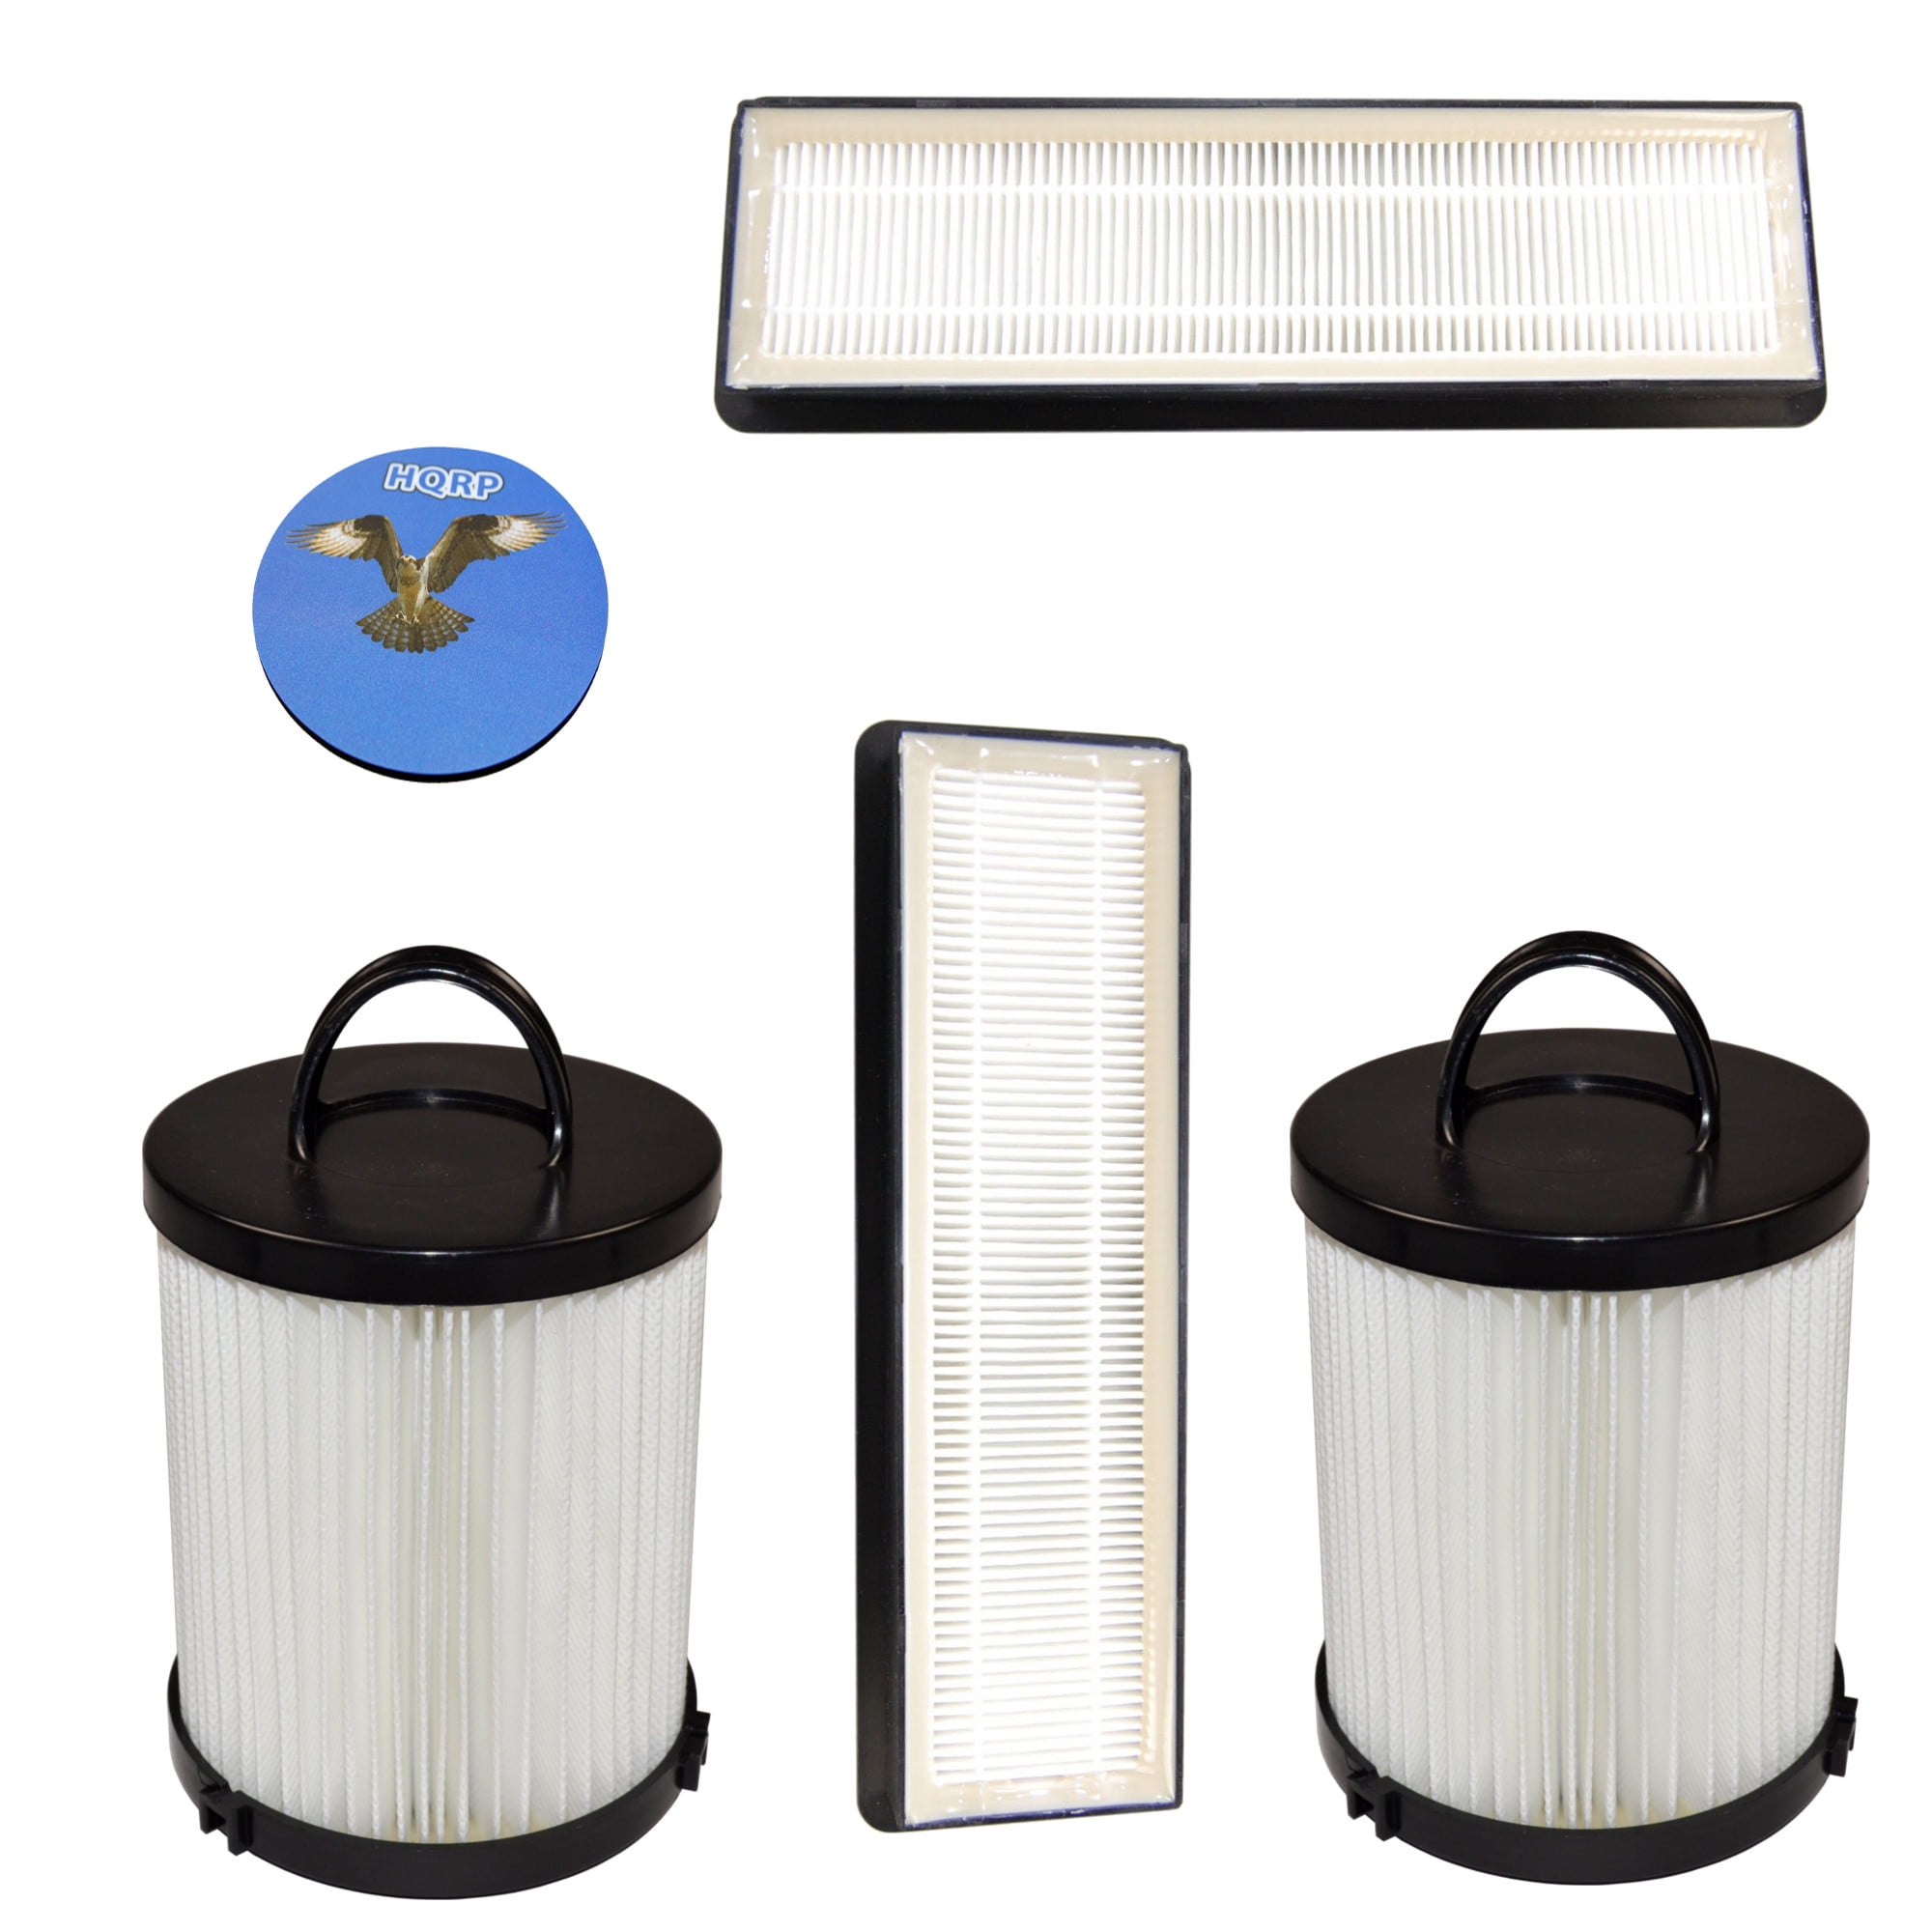 5 Vacuum Filter for Eureka AirSpeed AS1051A,AS1000A,AS1004A 